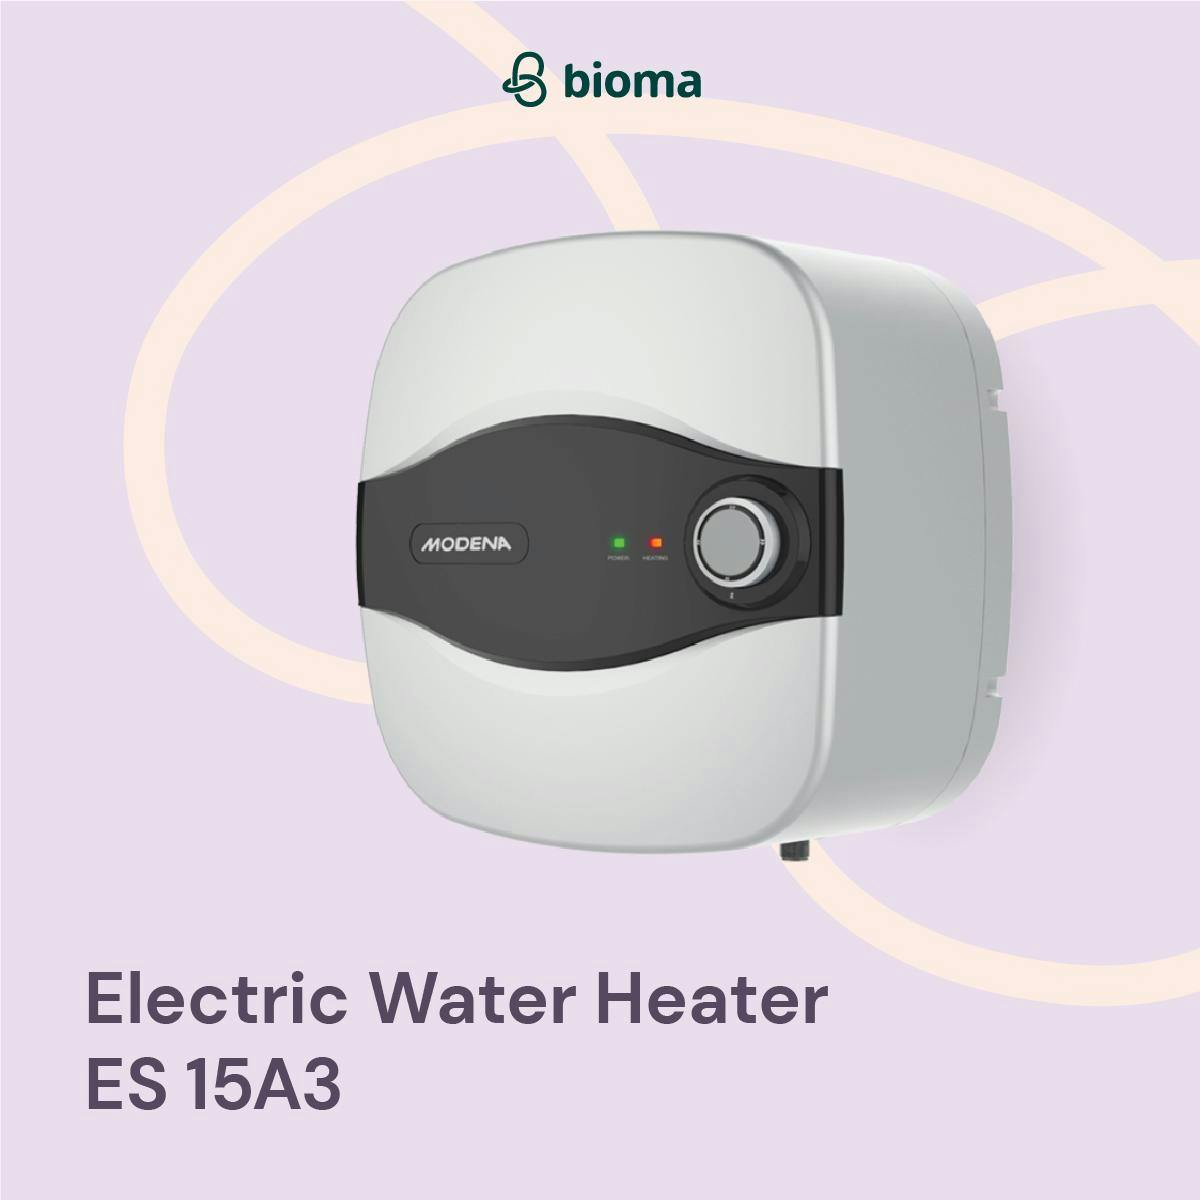 Electric Water Heater ES 15A3